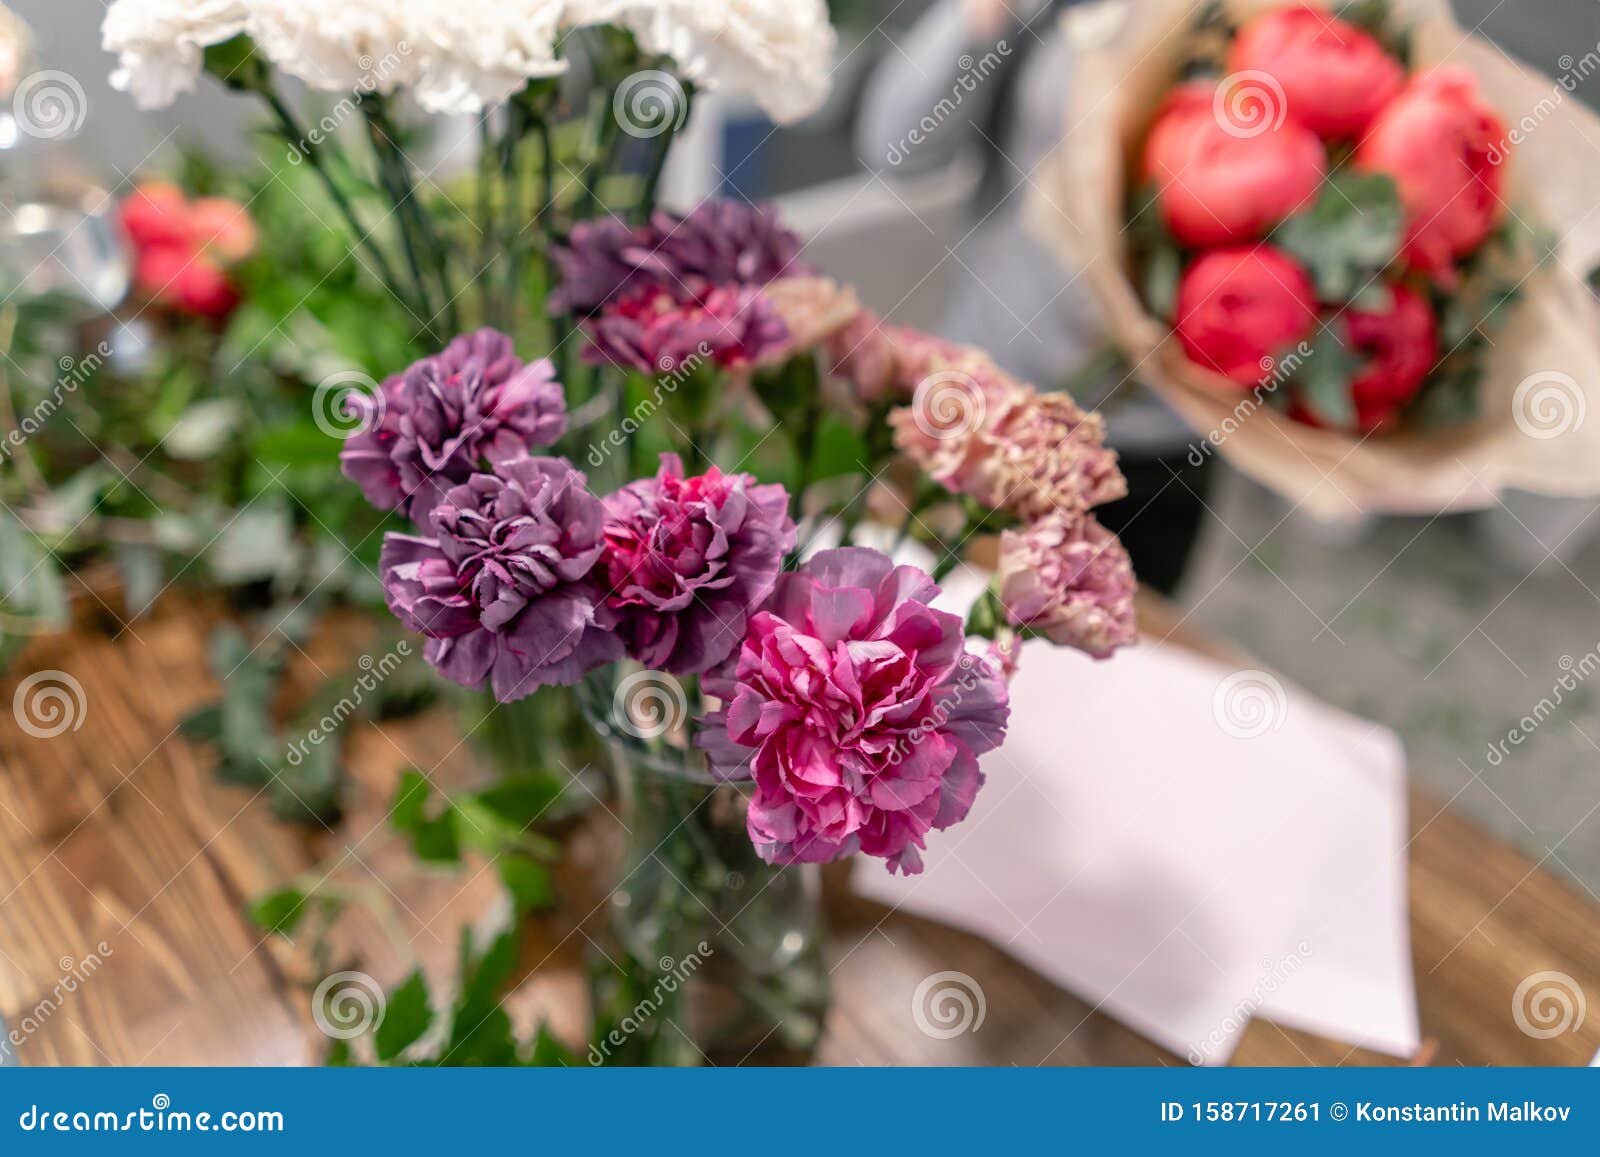 Master Class on Making Bouquets. Summer Bouquet Stock Image - Image of ...